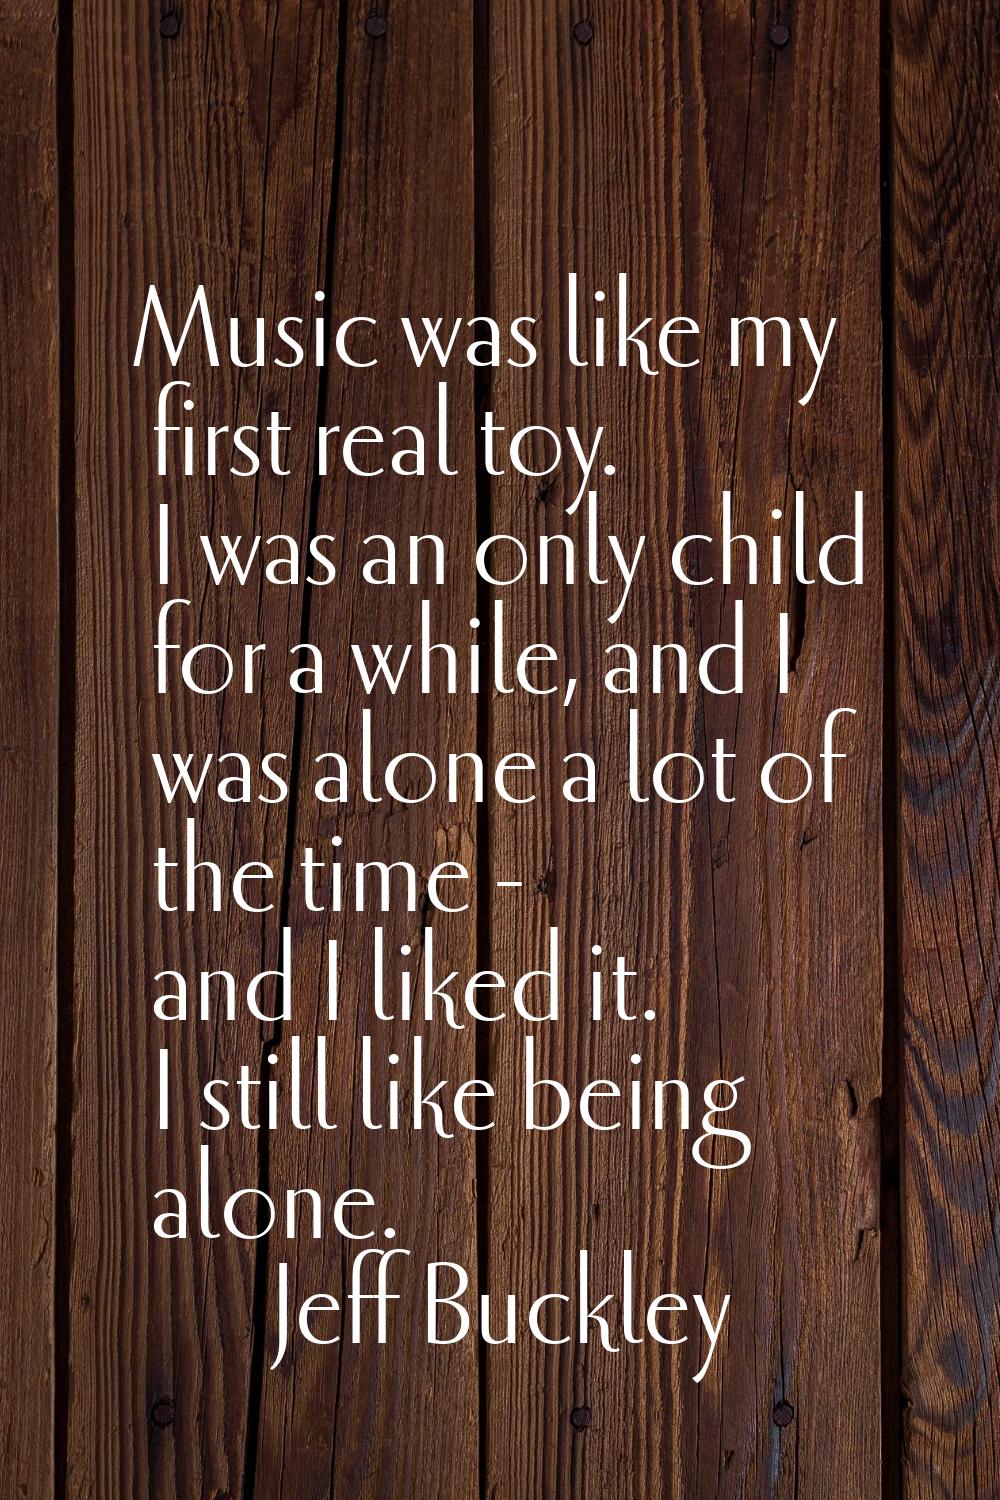 Music was like my first real toy. I was an only child for a while, and I was alone a lot of the tim